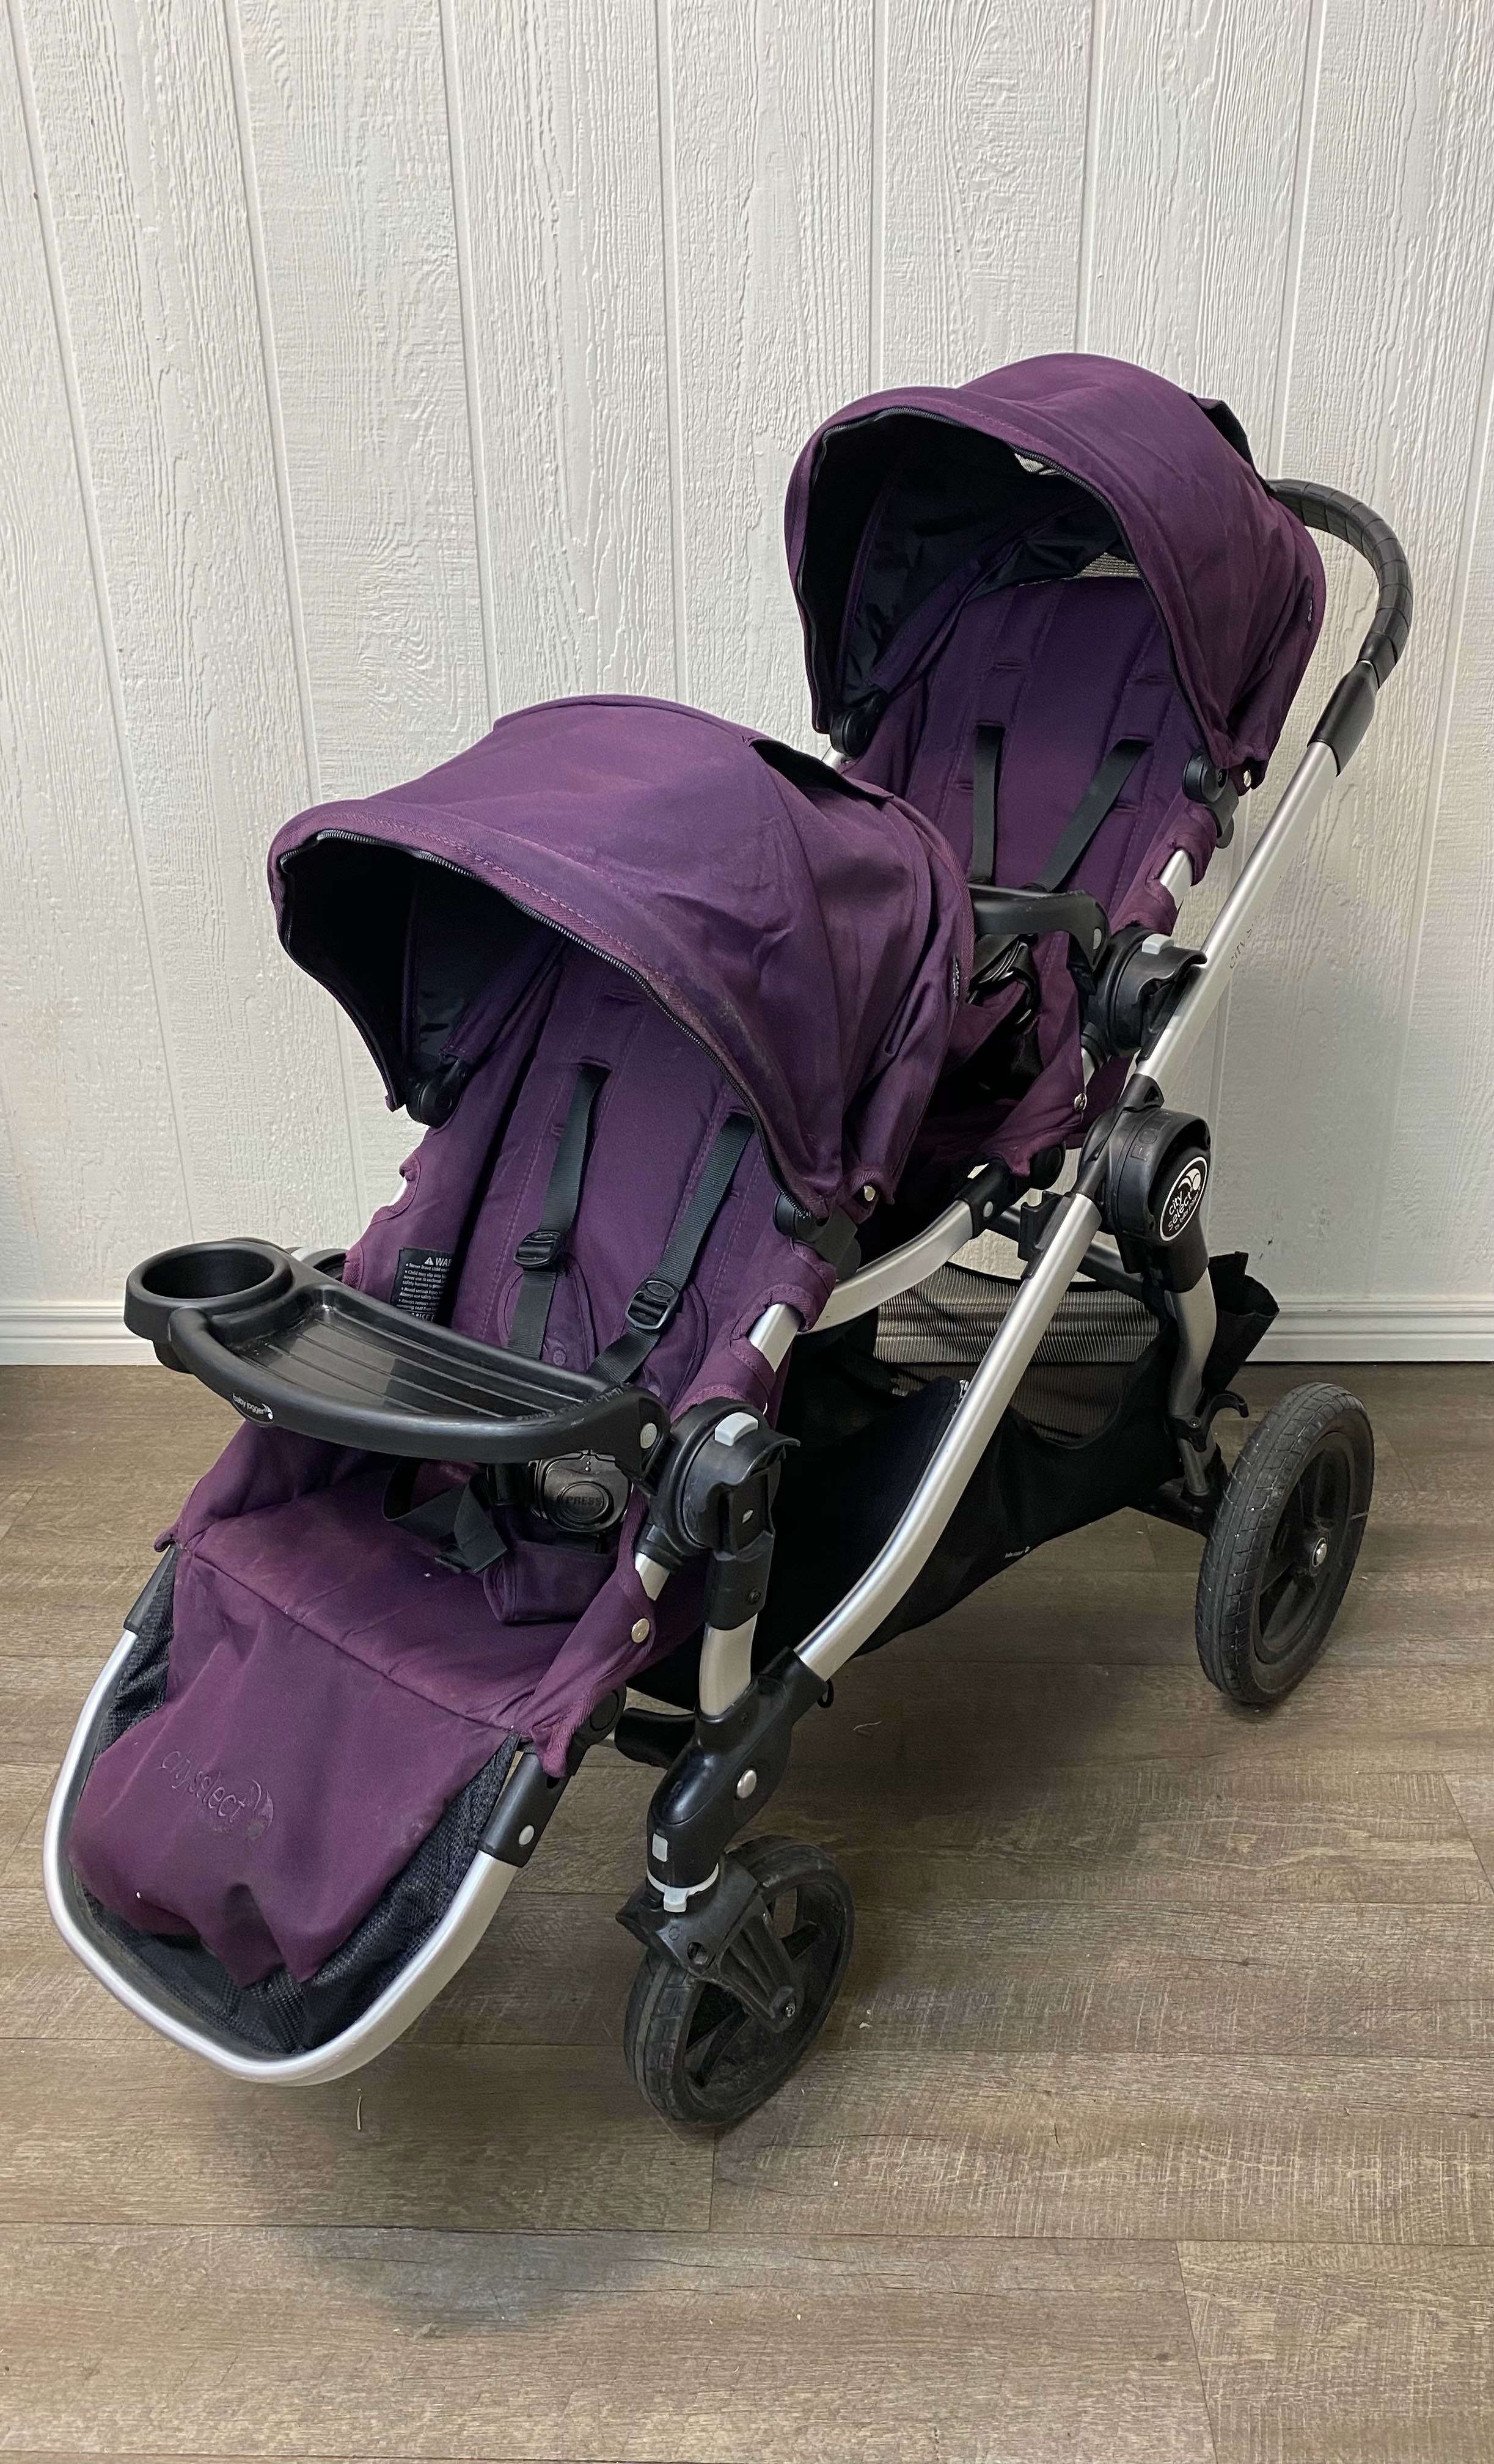 hardware Hus bænk Baby Jogger City Select Double Stroller, Amethyst, 2016